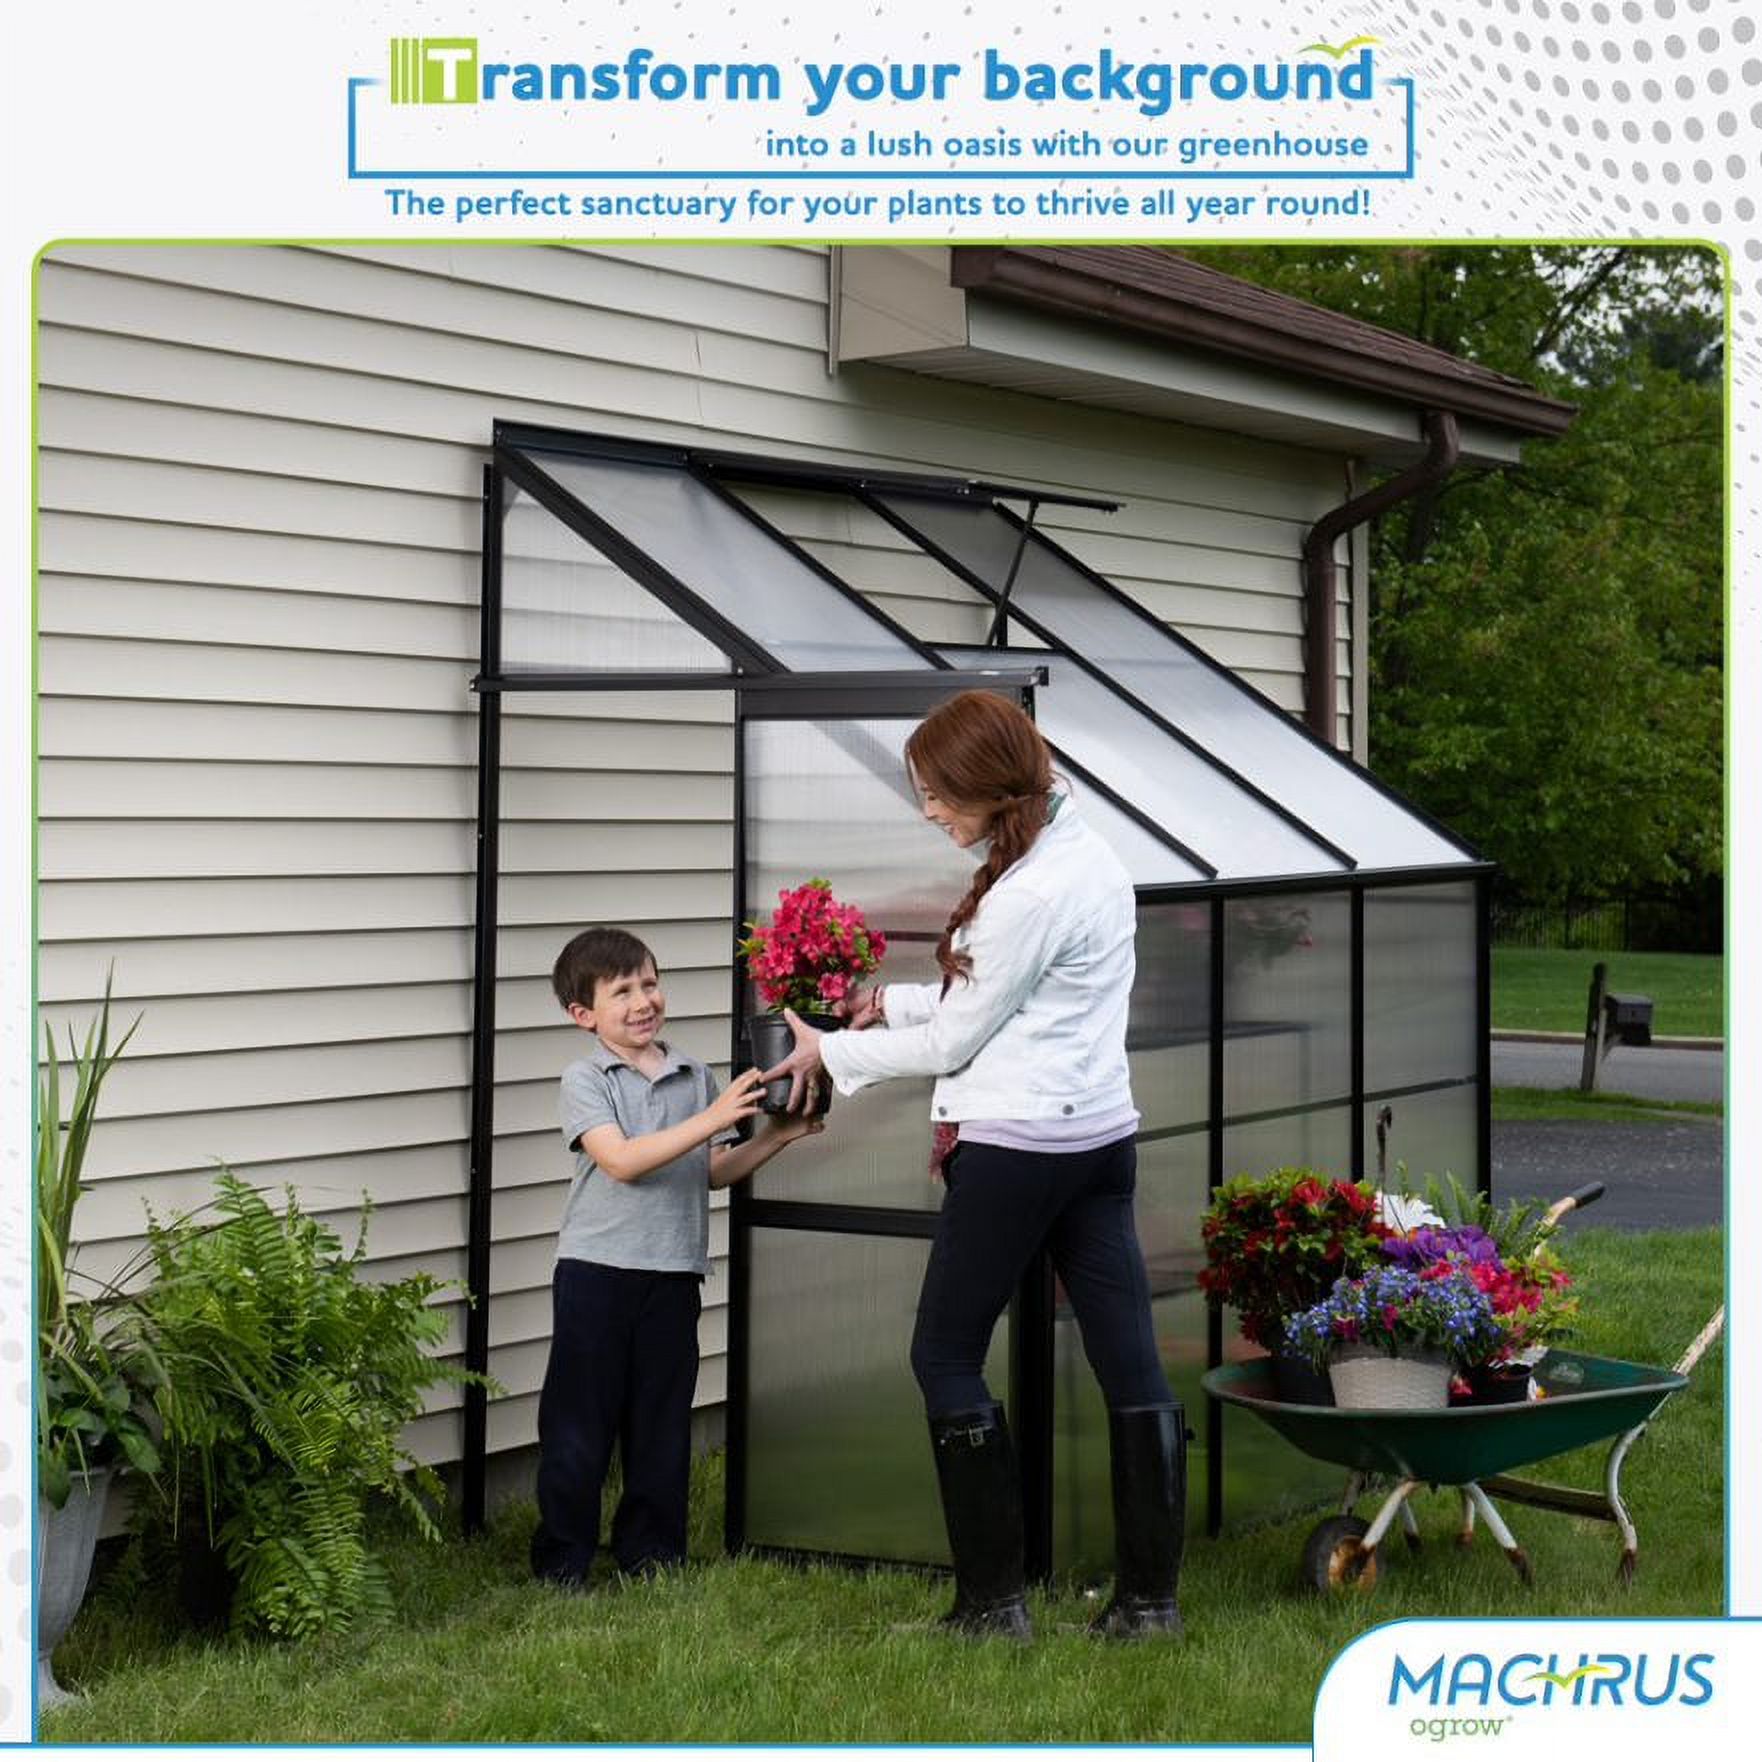 Machrus Ogrow 4 x 6 FT Lean-To-Wall Walk-In Greenhouse with Sliding Door and Adjustable Roof Vent - image 7 of 7